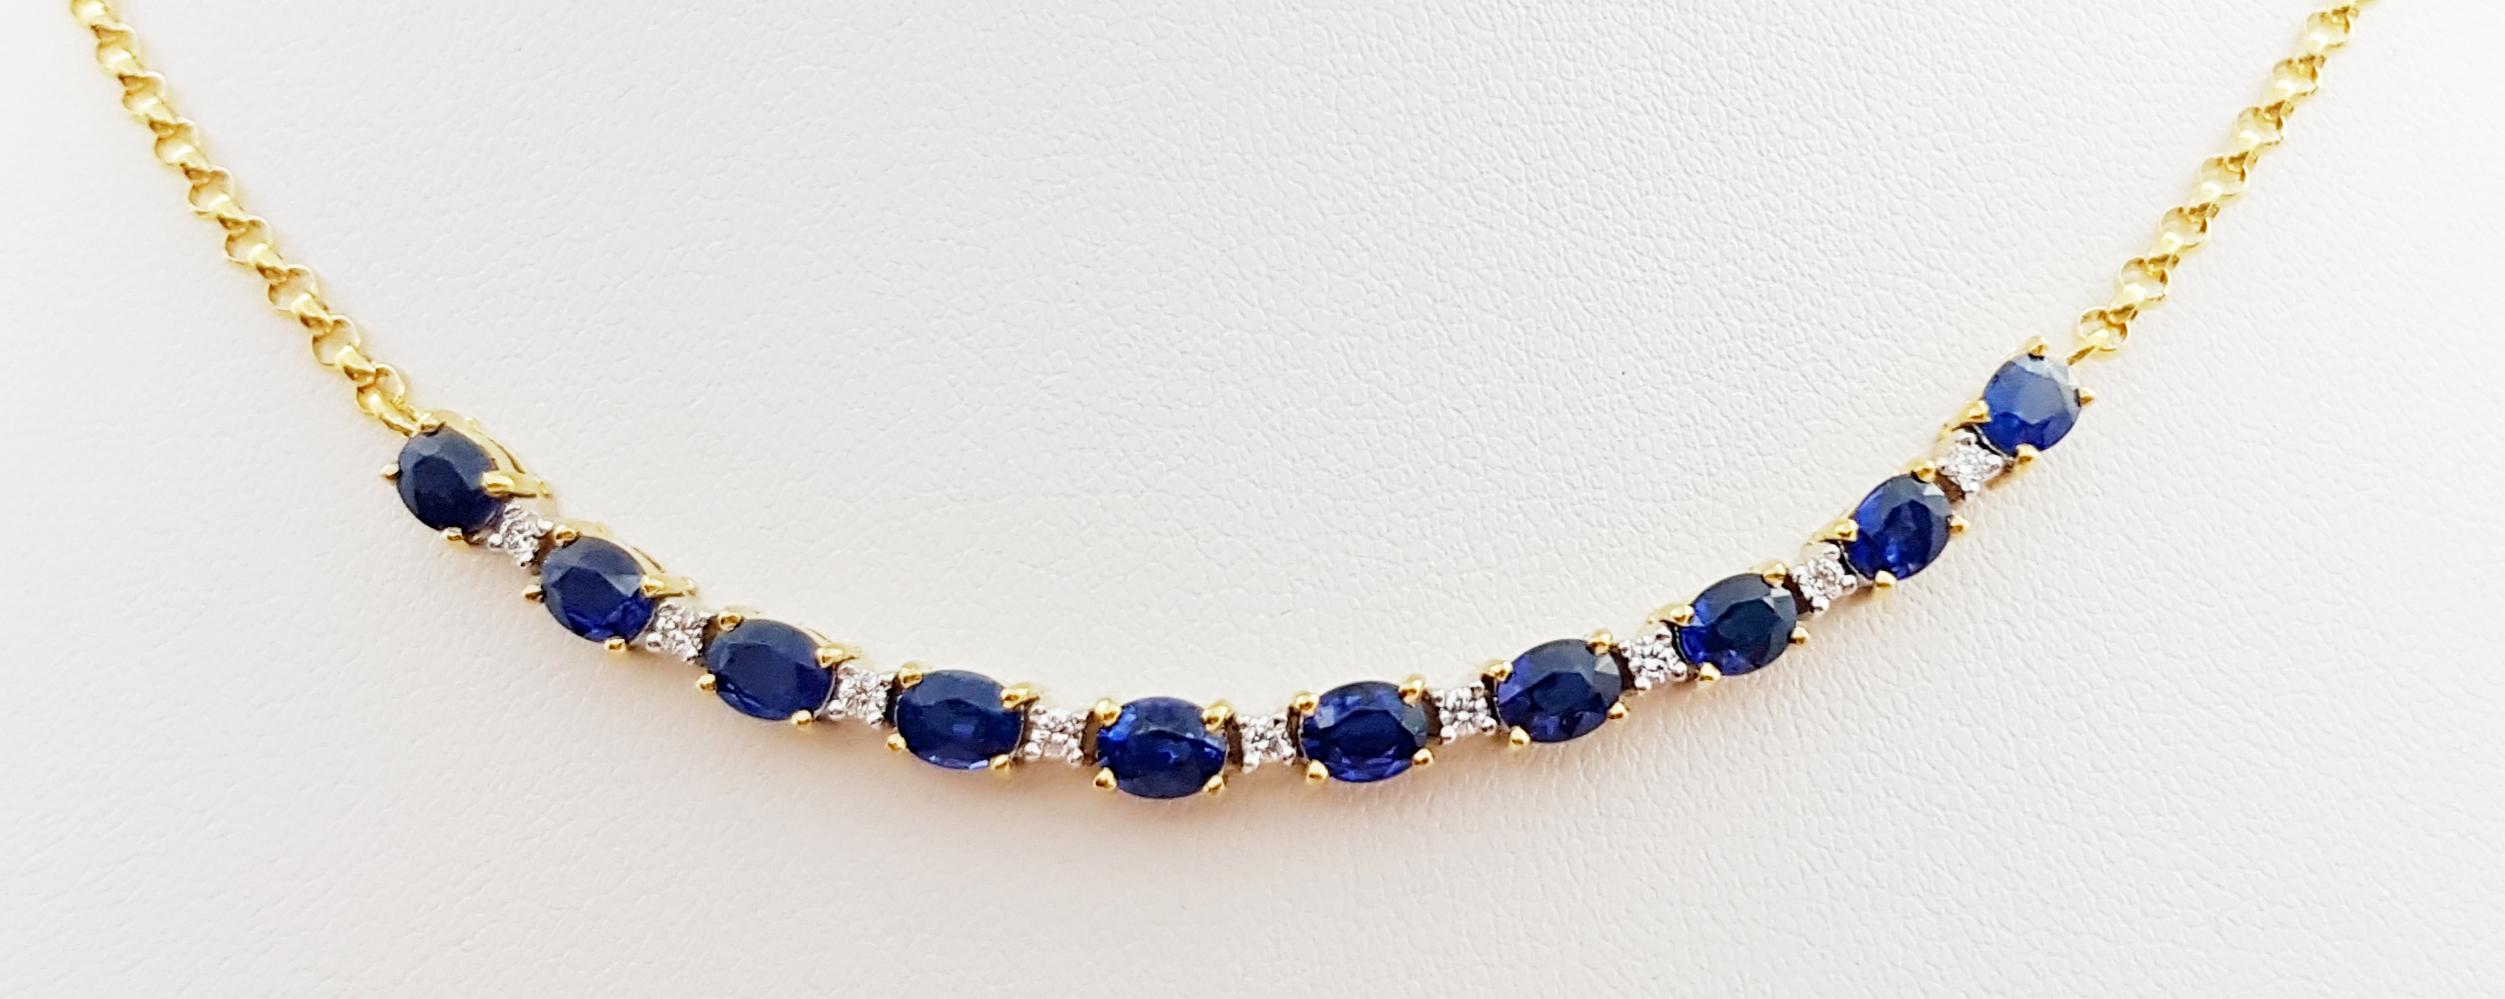 Blue Sapphire 3.32 carats with Diamond 0.19 carat Necklace set in 18 Karat Gold Settings

Width: 0.4 cm 
Length: 47.0 cm
Total Weight: 10.7 grams

